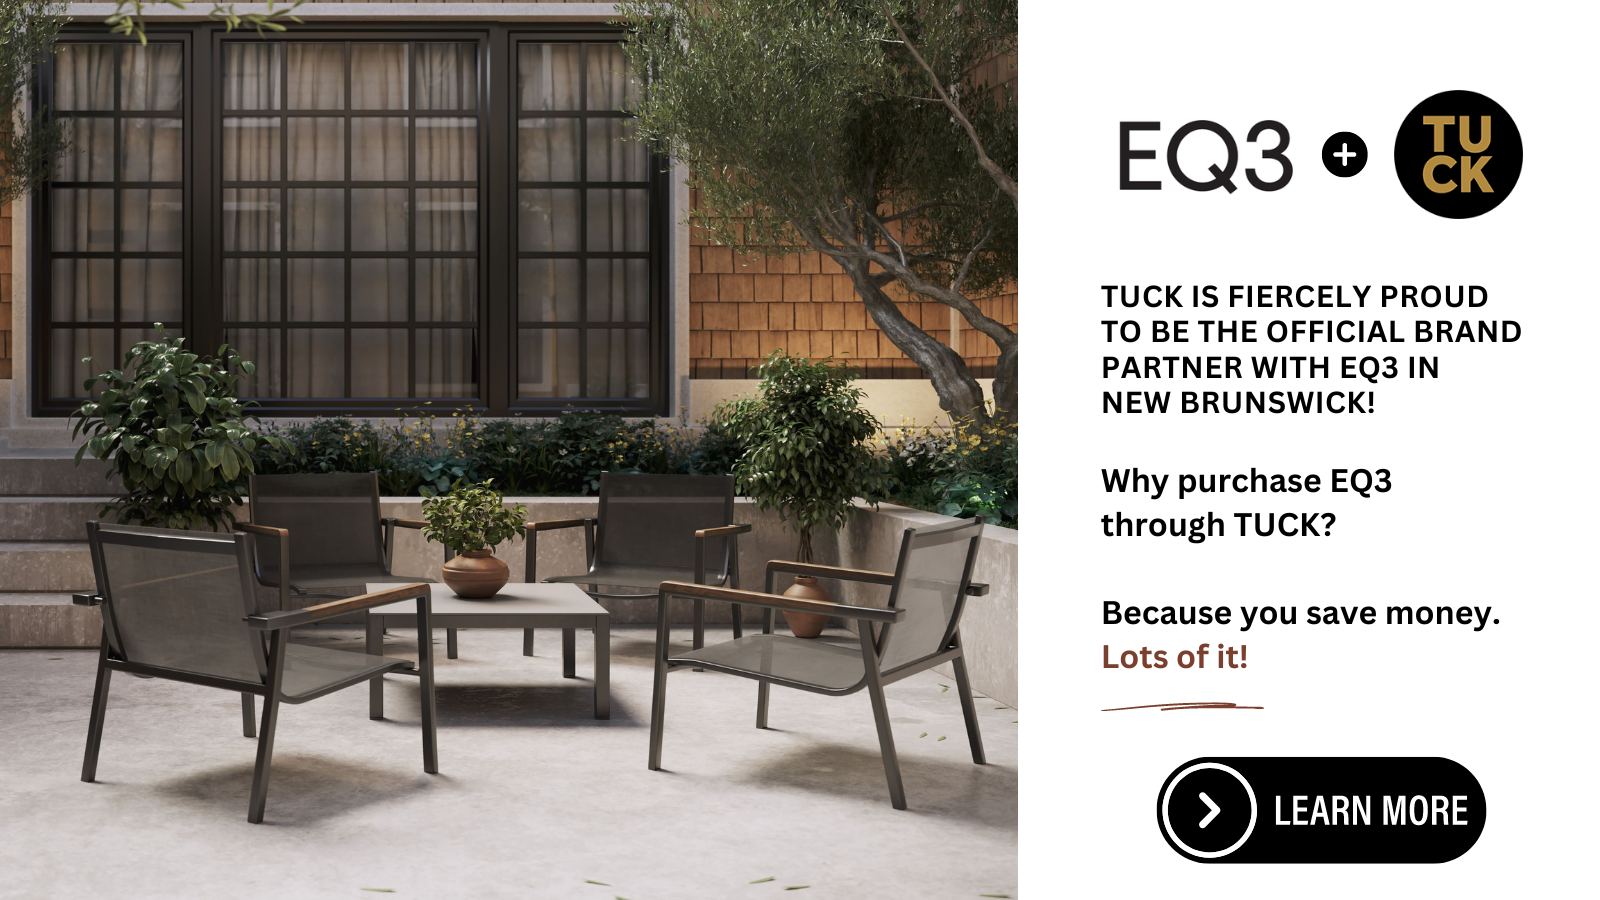 Purchase your EQ3 Outdoor furniture through Tuck & Save Money!